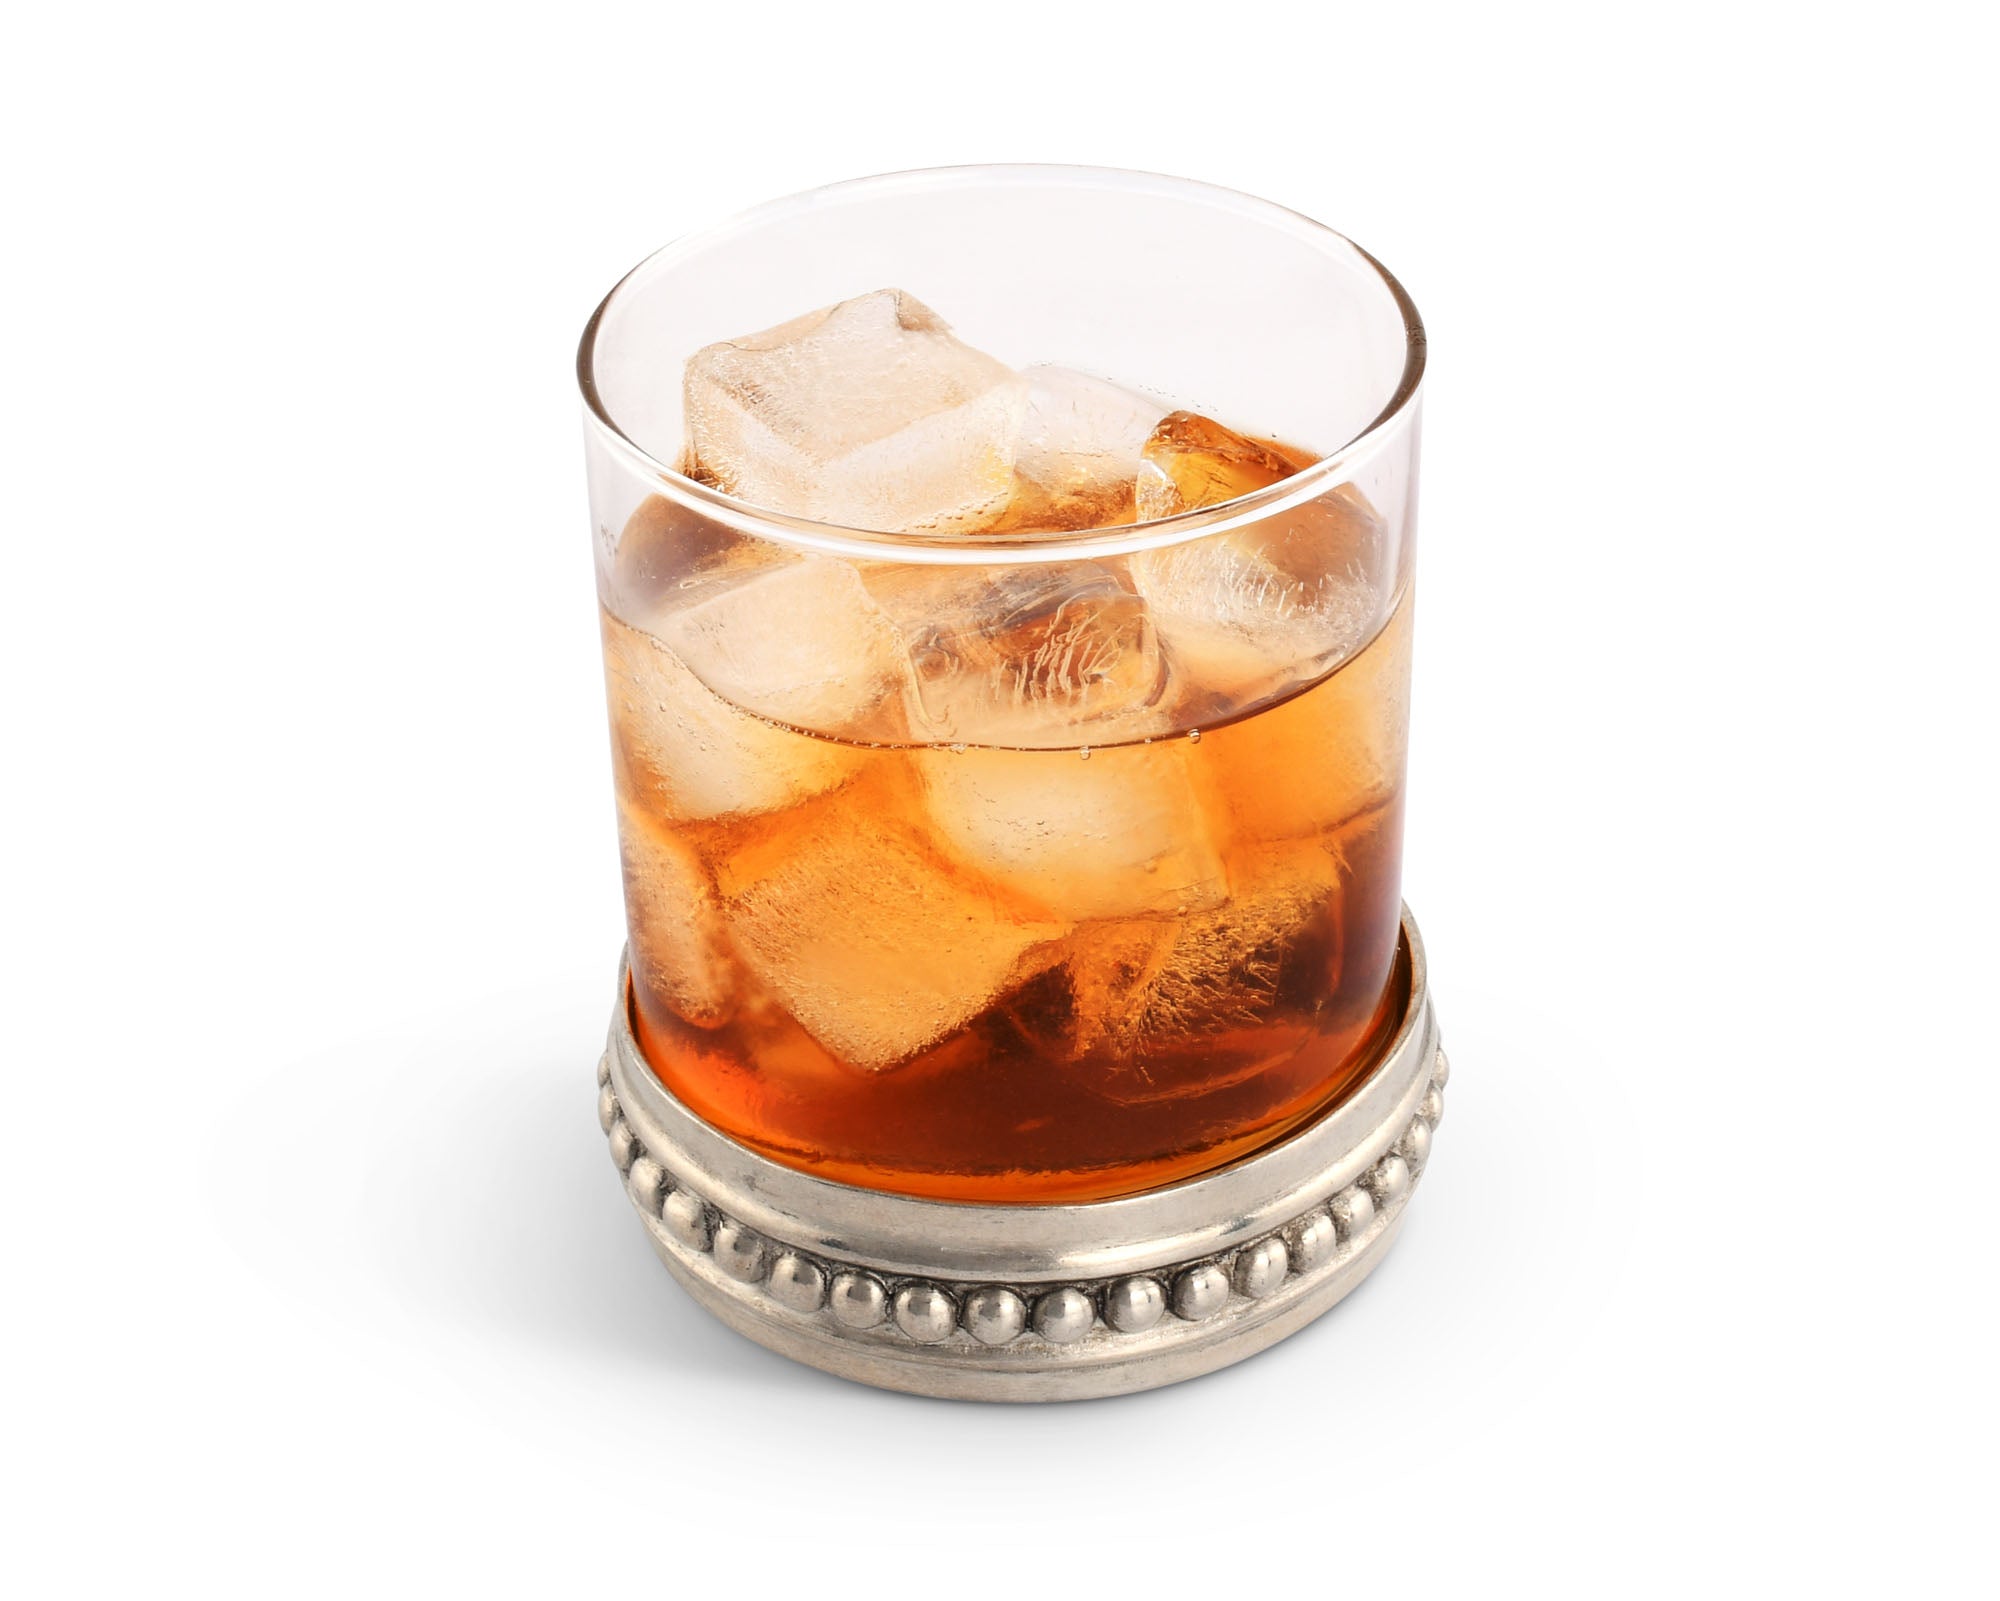 MATCH Pewter Whiskey Glass